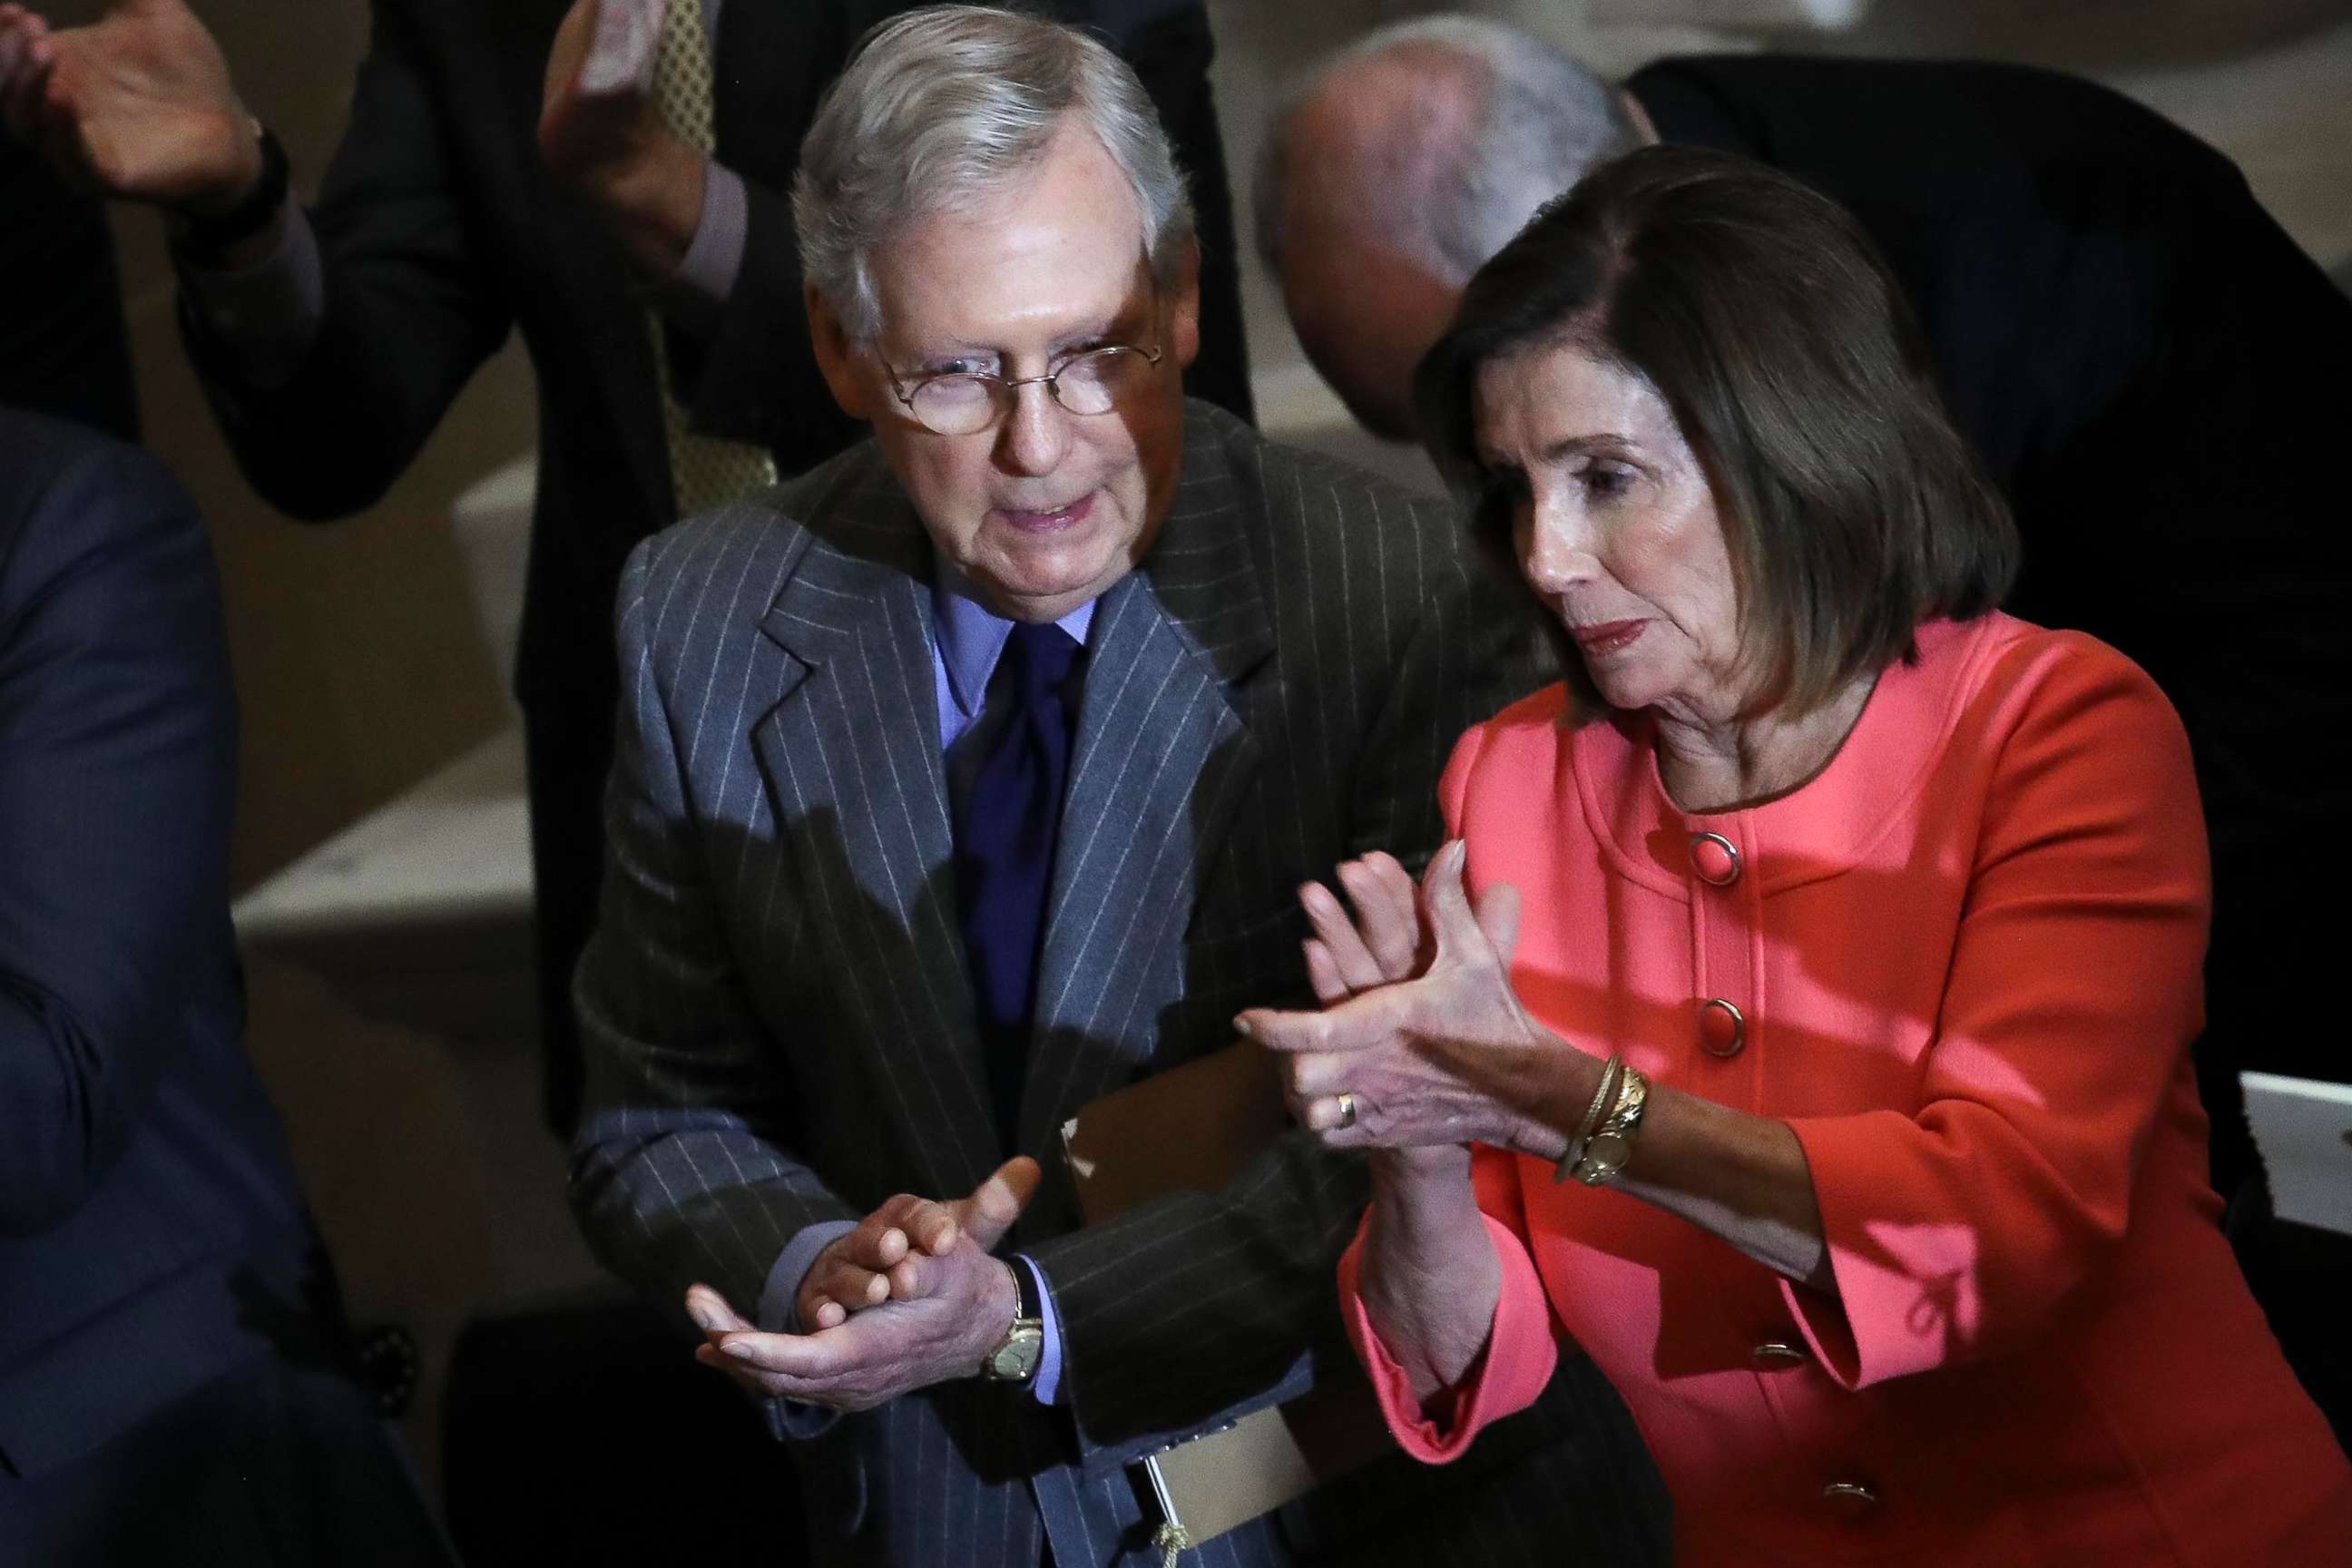 PHOTO: Speaker of the House Nancy Pelosi and Senate Majority Leader Mitch McConnell briefly speak with each other as they attend a Congressional Gold Medal ceremony at the Capitol, Jan. 15, 2020.